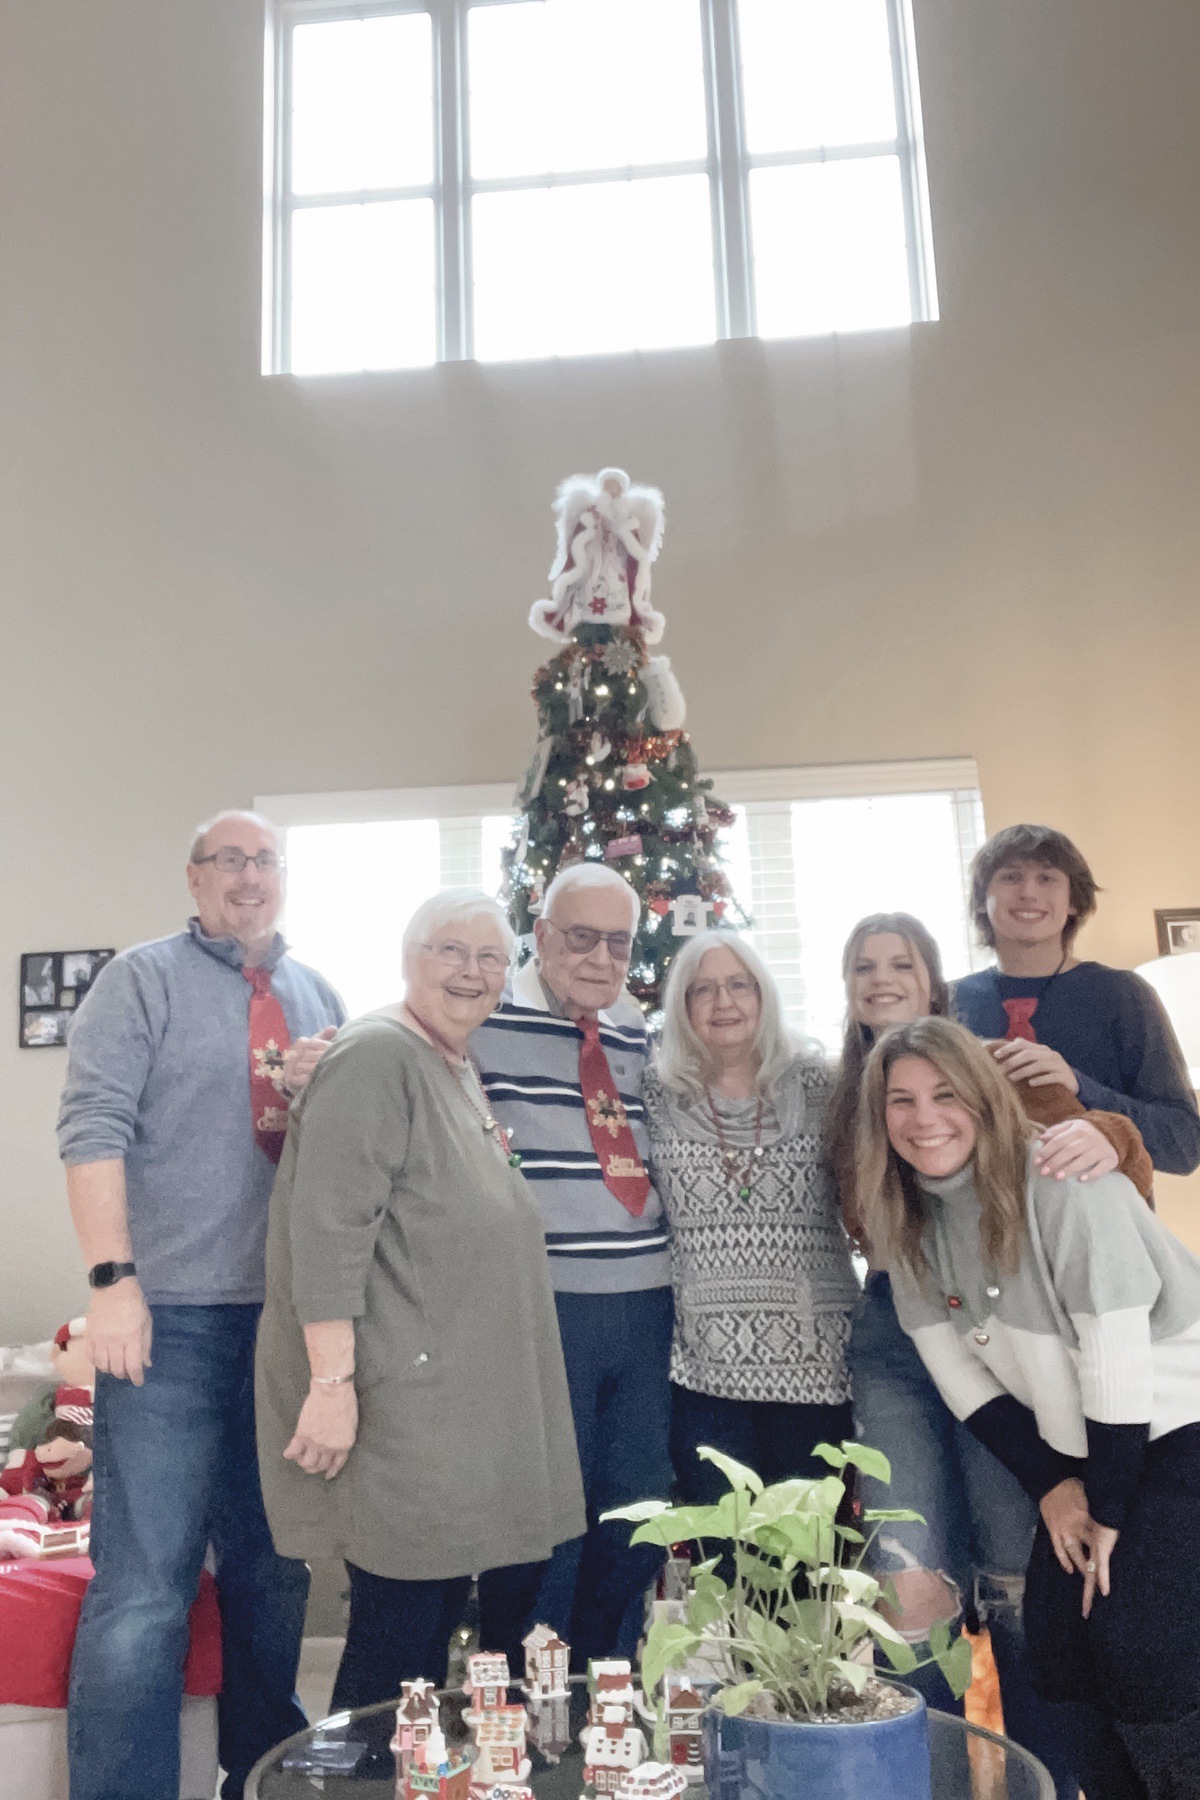 Janet Kargol (second from left) and her family still enjoying Christmas traditions. (Photo provided)